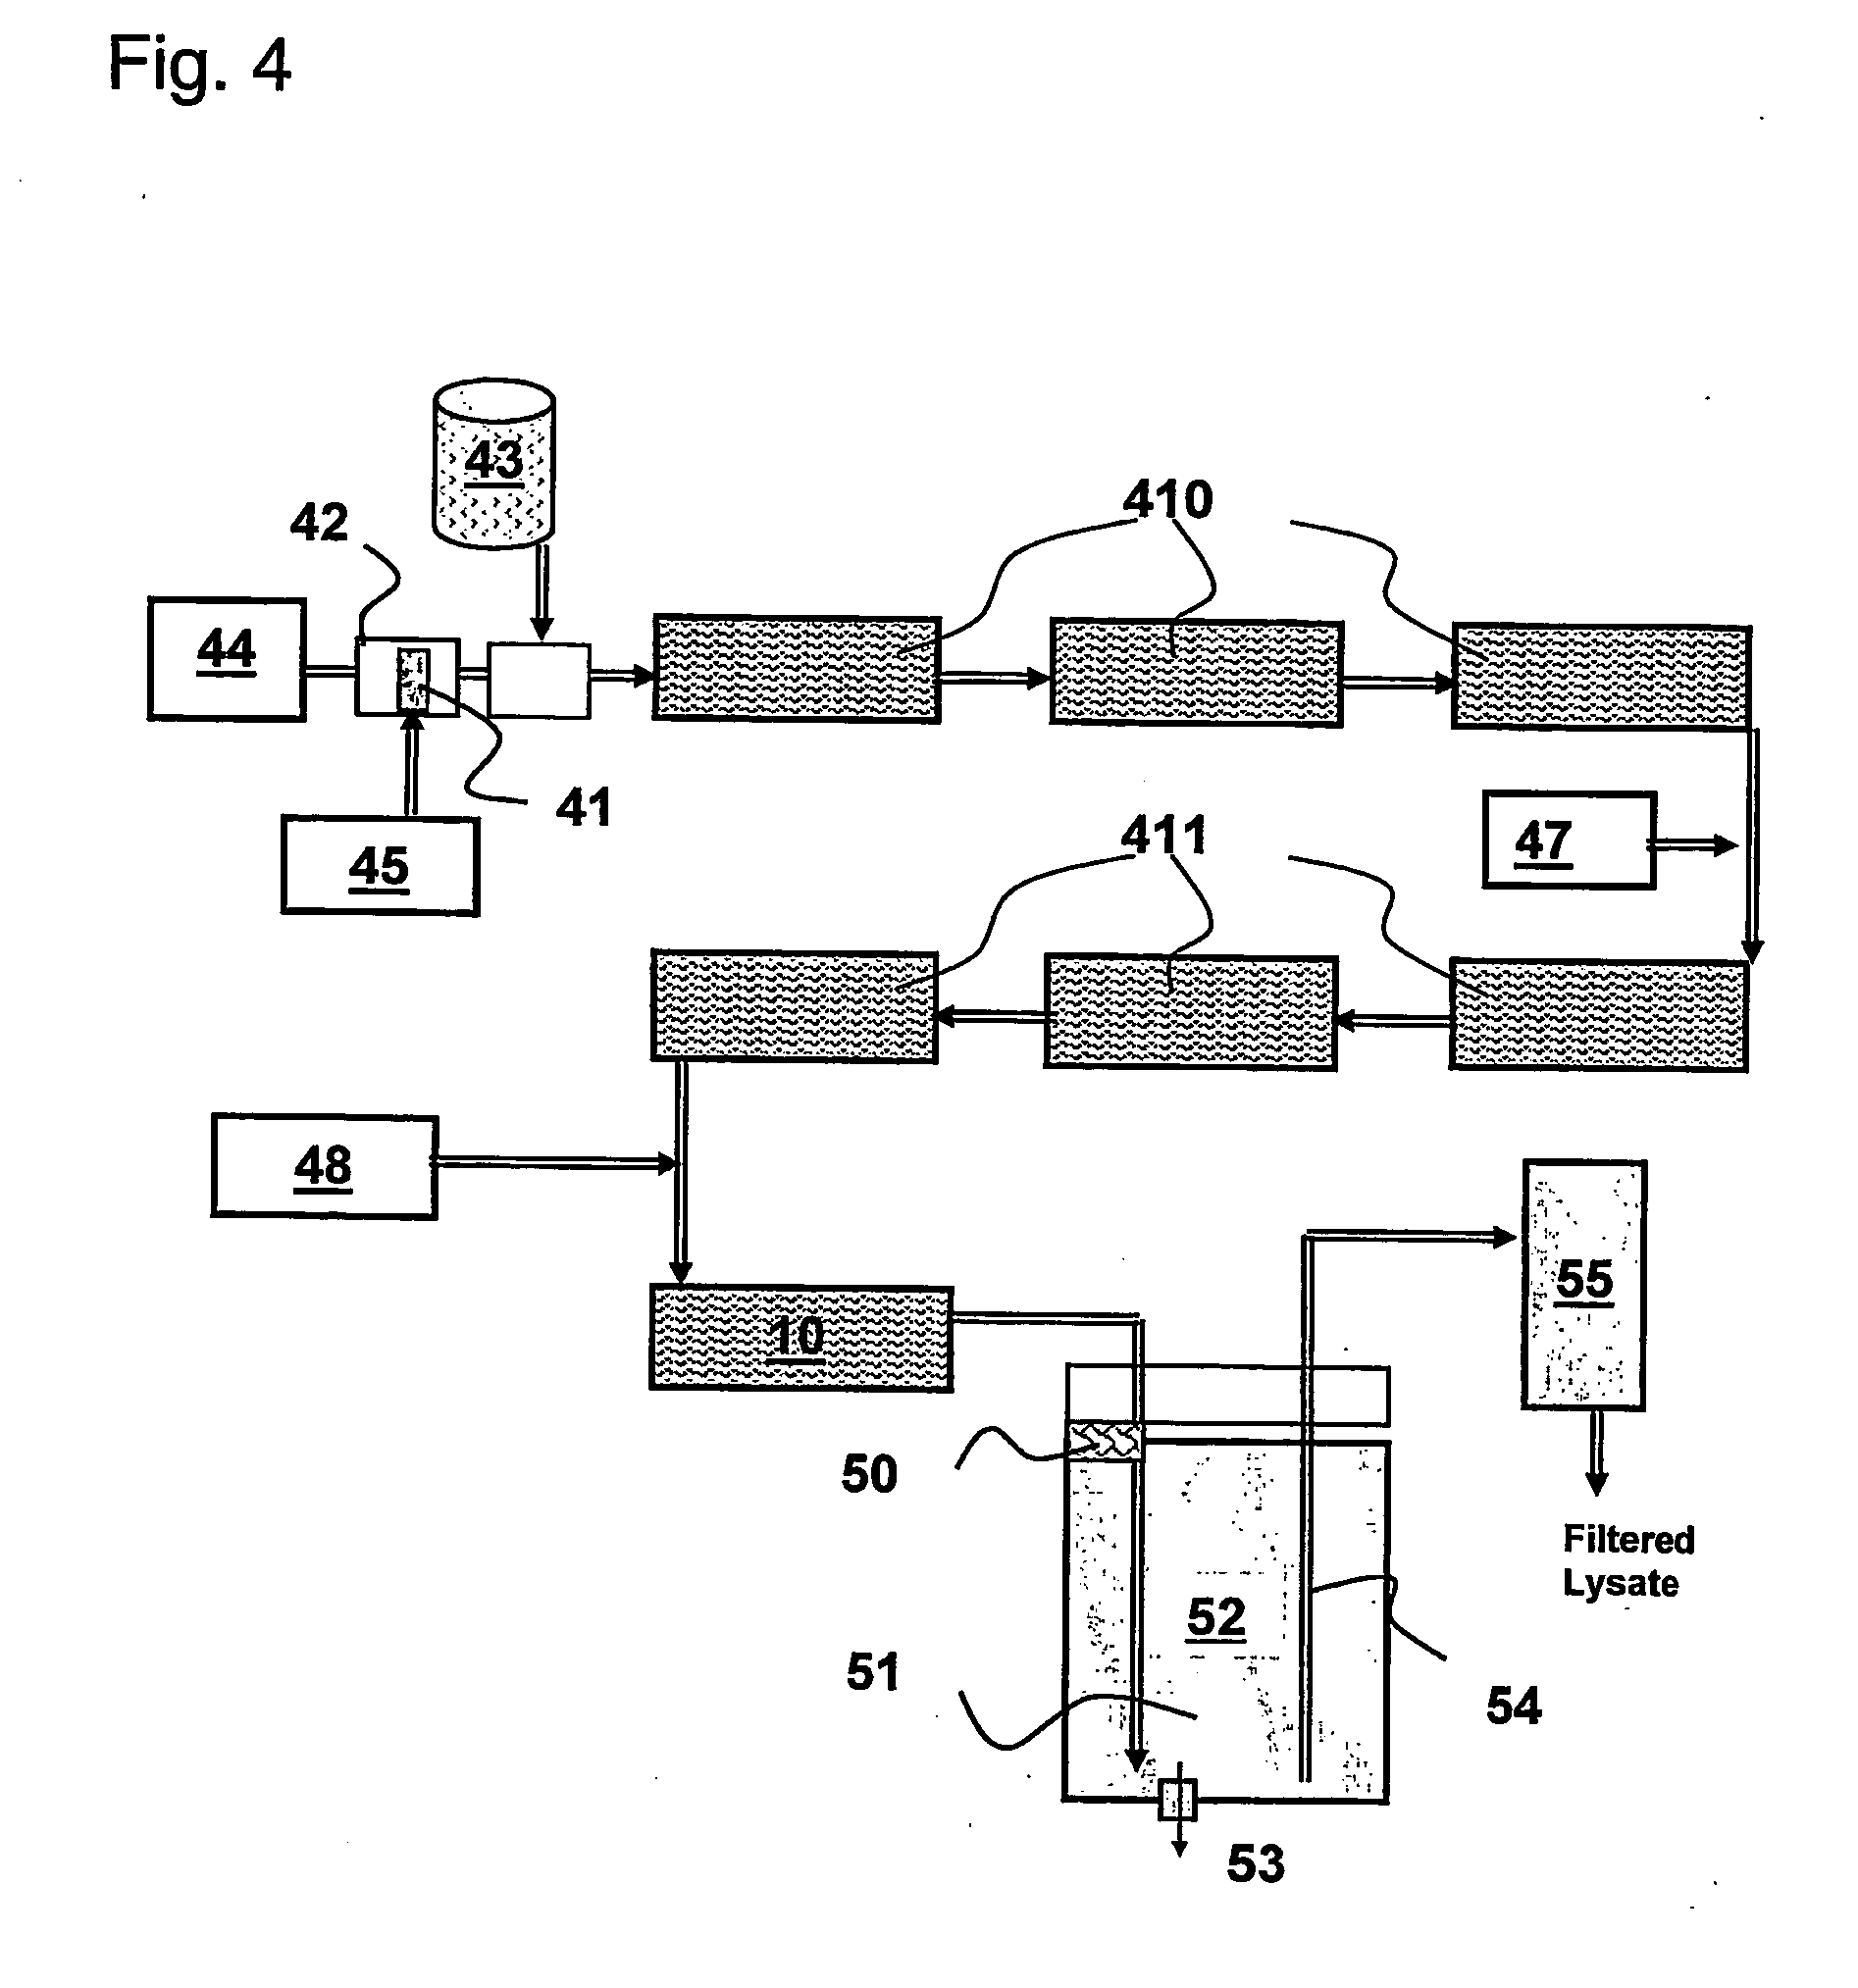 Apparatus and method for preparative scale purification of nucleic acids